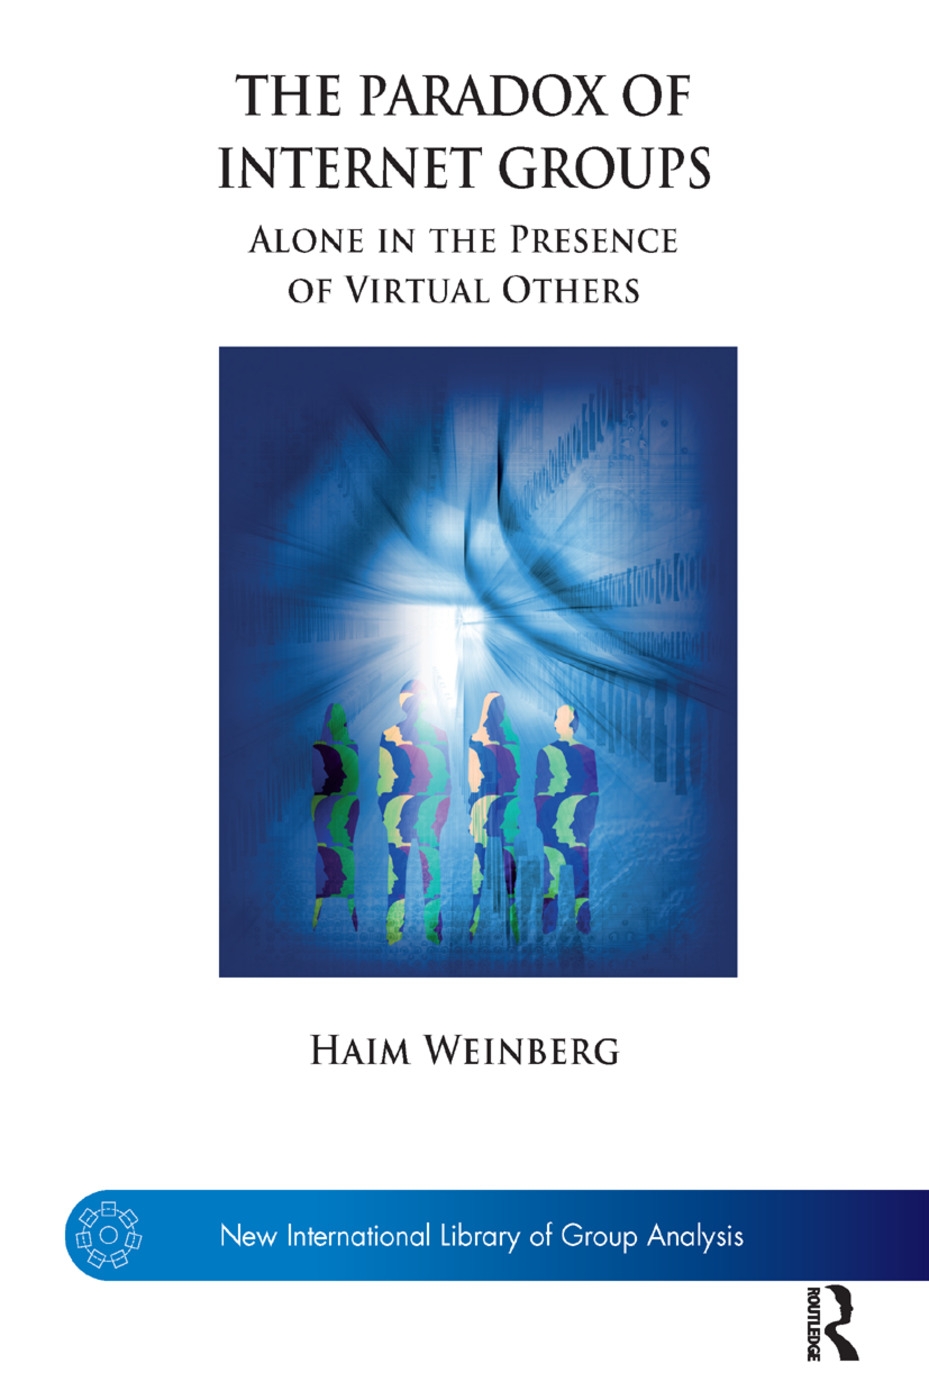 The Paradox of Internet Groups: Alone in the Presence of Virtual Others